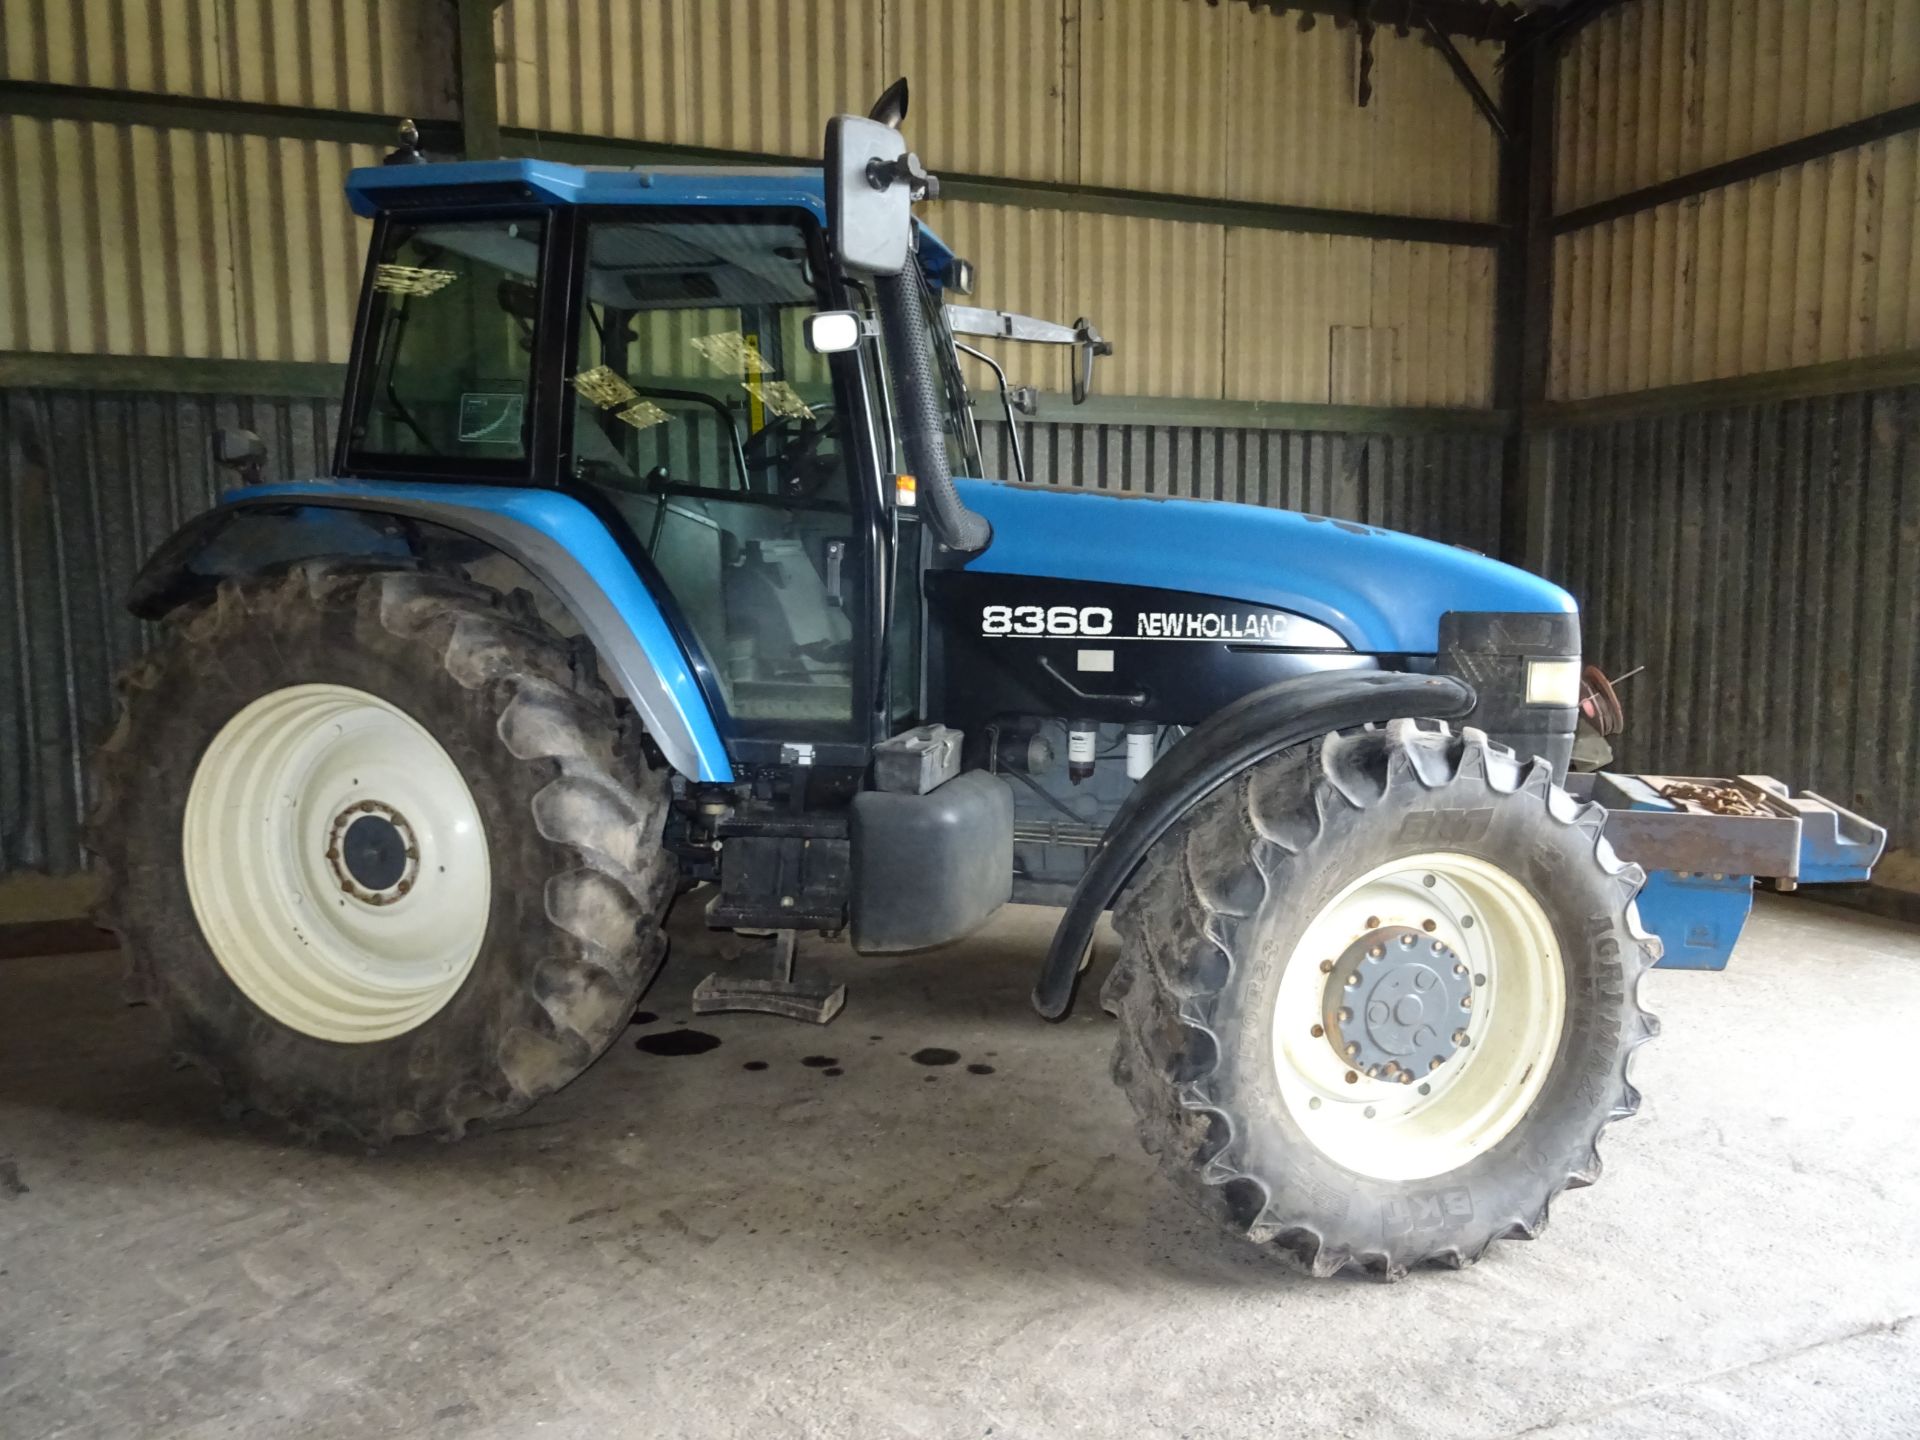 1999 NEW HOLLAND 8360 4WD TRACTOR COMPLETE WITH FRONT WEIGHTS 7130 RECORDED HOURS. - Image 2 of 7